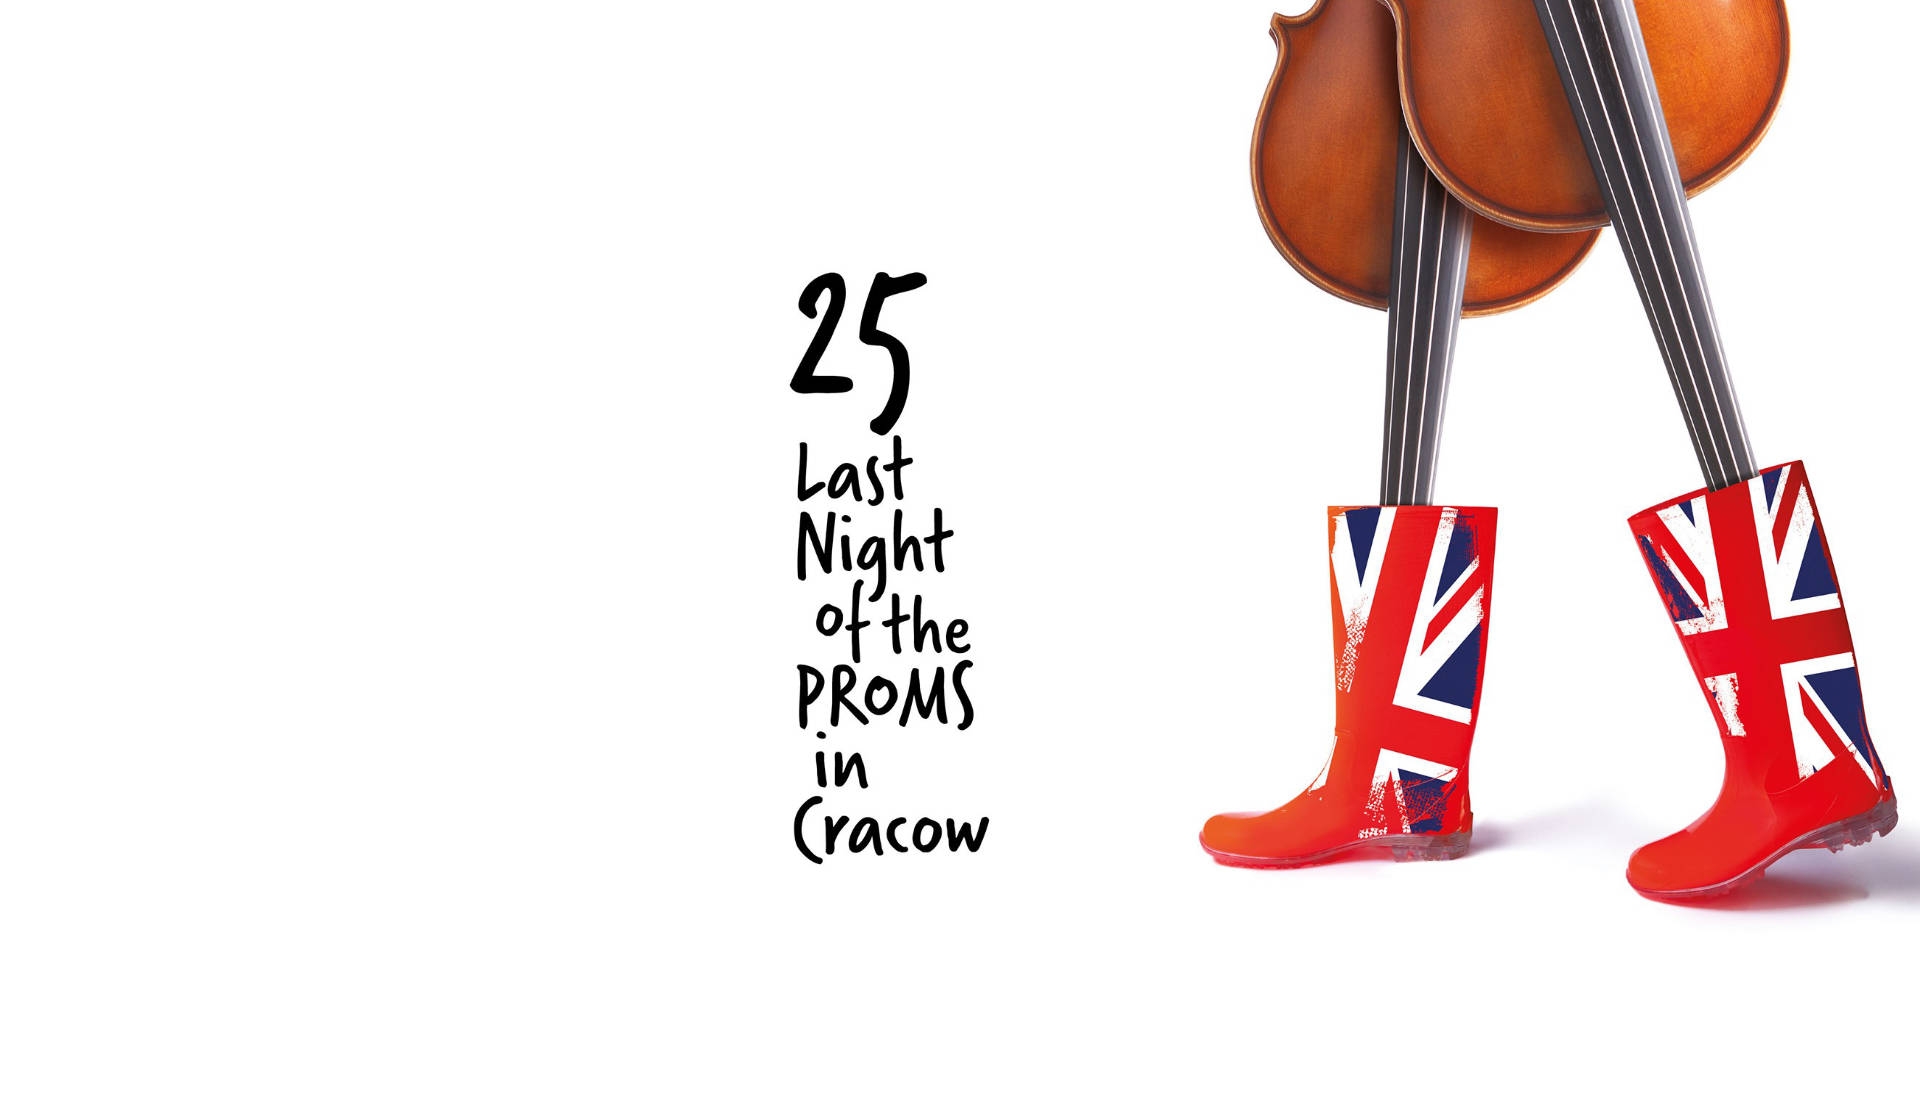 18.09.2021 –  The last night of the Proms in Cracow